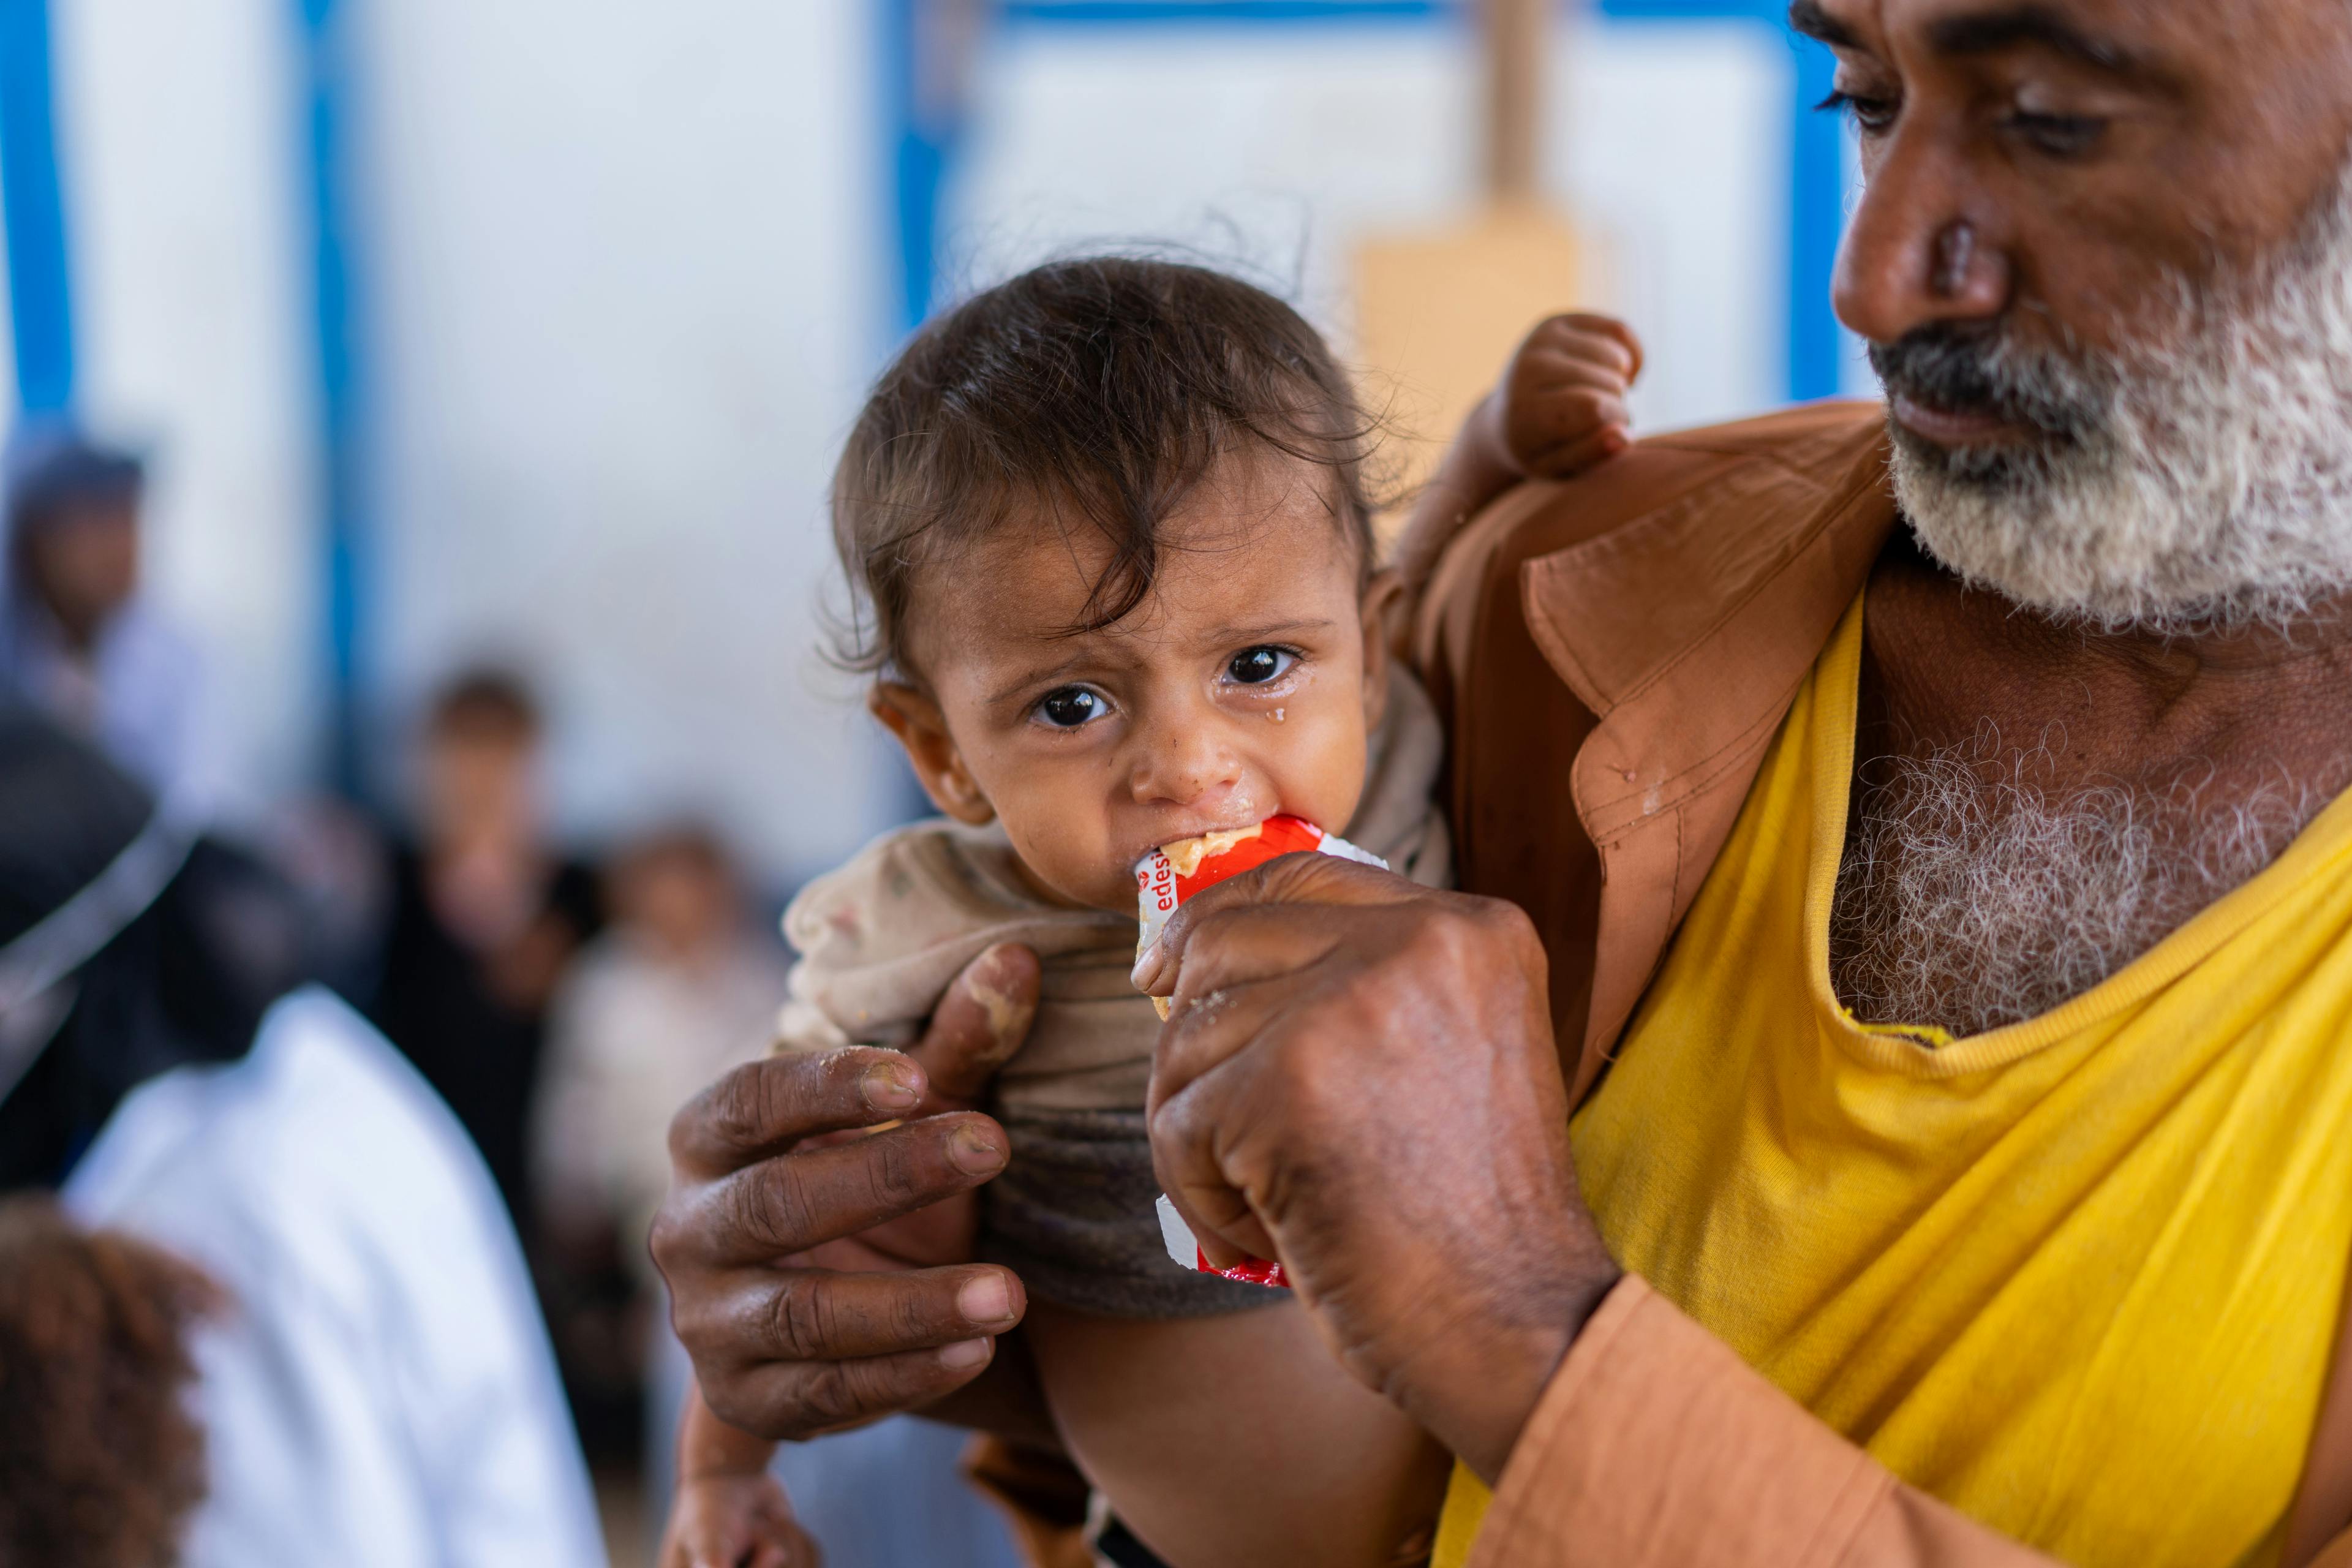 On 10 January 2023, a child eats from a sachet of Ready-to-Use Therapeutic Food (RUTF) while his father holds him in Al-Sha’ab, a camp for internally displaced persons in Al Buraiqeh District, Aden Governorate, Yemen.